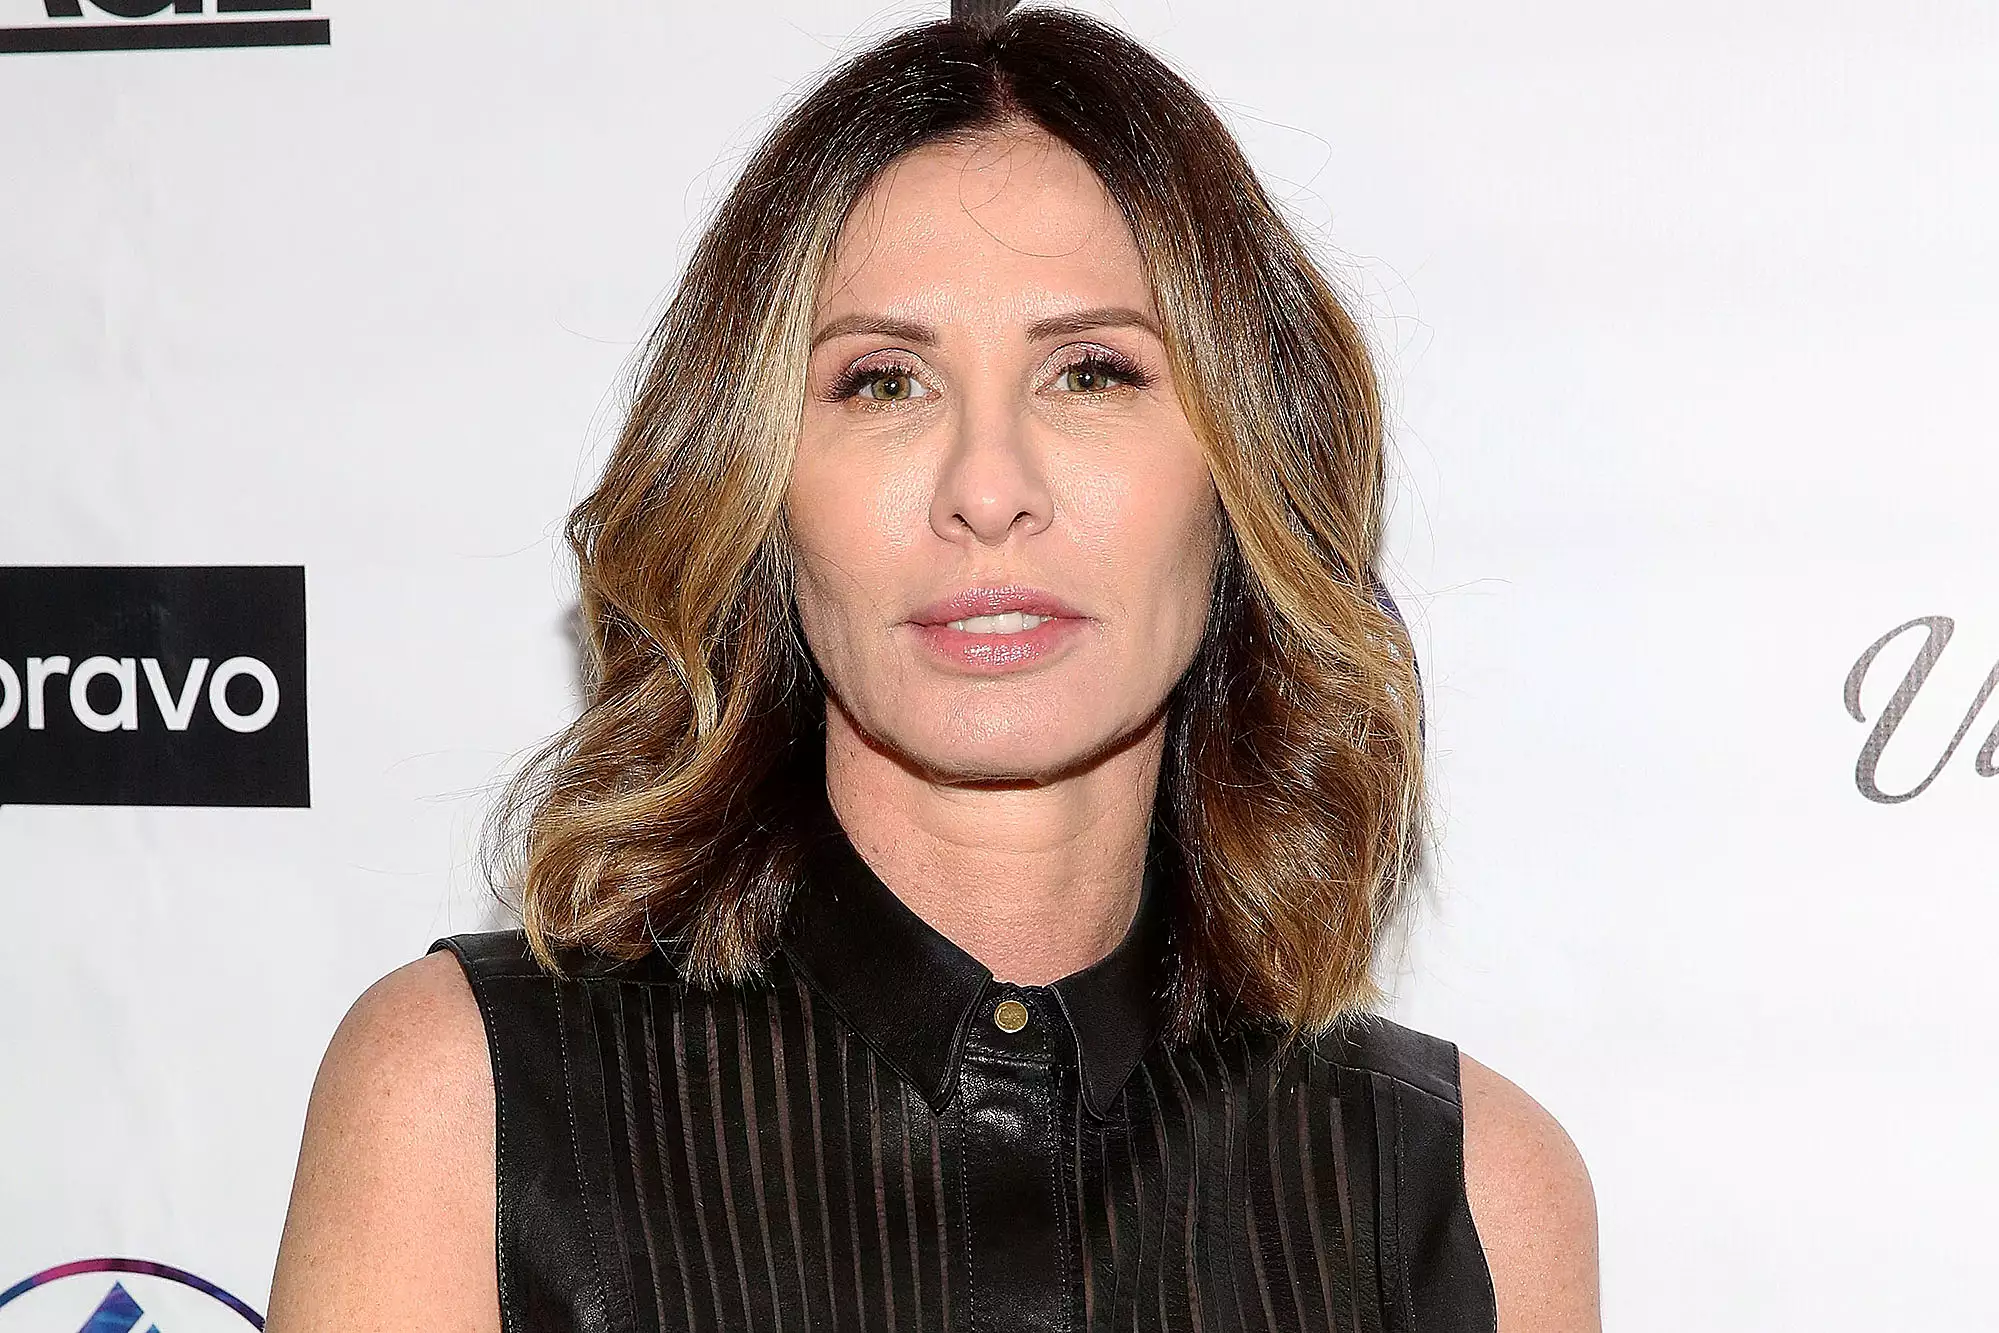 Carole Radziwill Blasts Bravo For Being Rude and Not Paying Her!